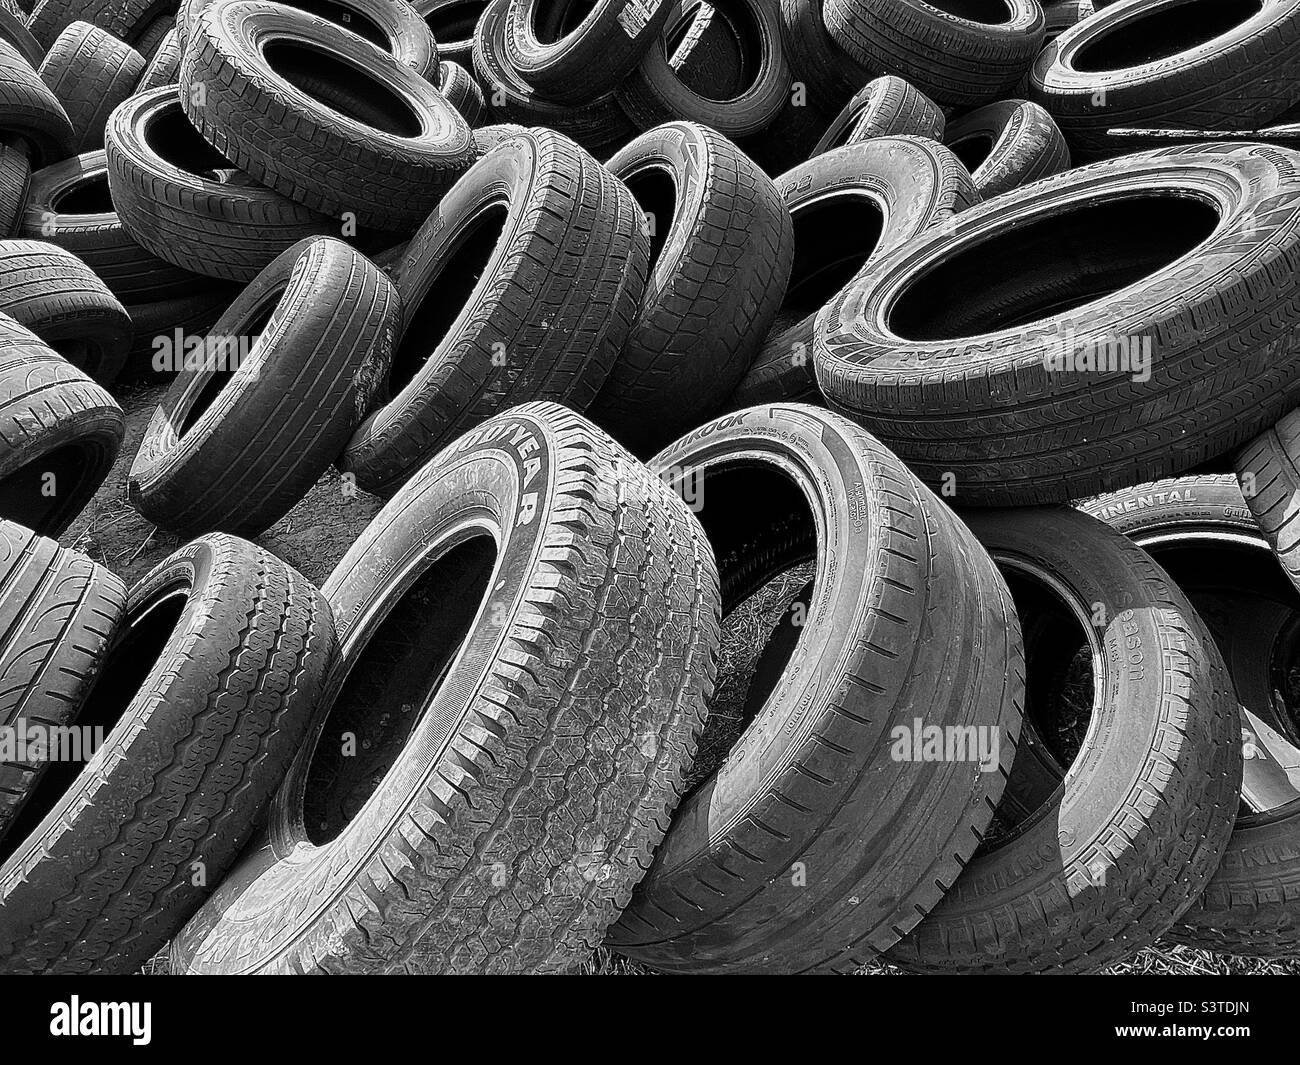 A bunch of old and worn tires piled up behind a car/tire shop in Utah, USA. Desaturating to black and white and adding some contrast makes for an interesting abstract. Stock Photo